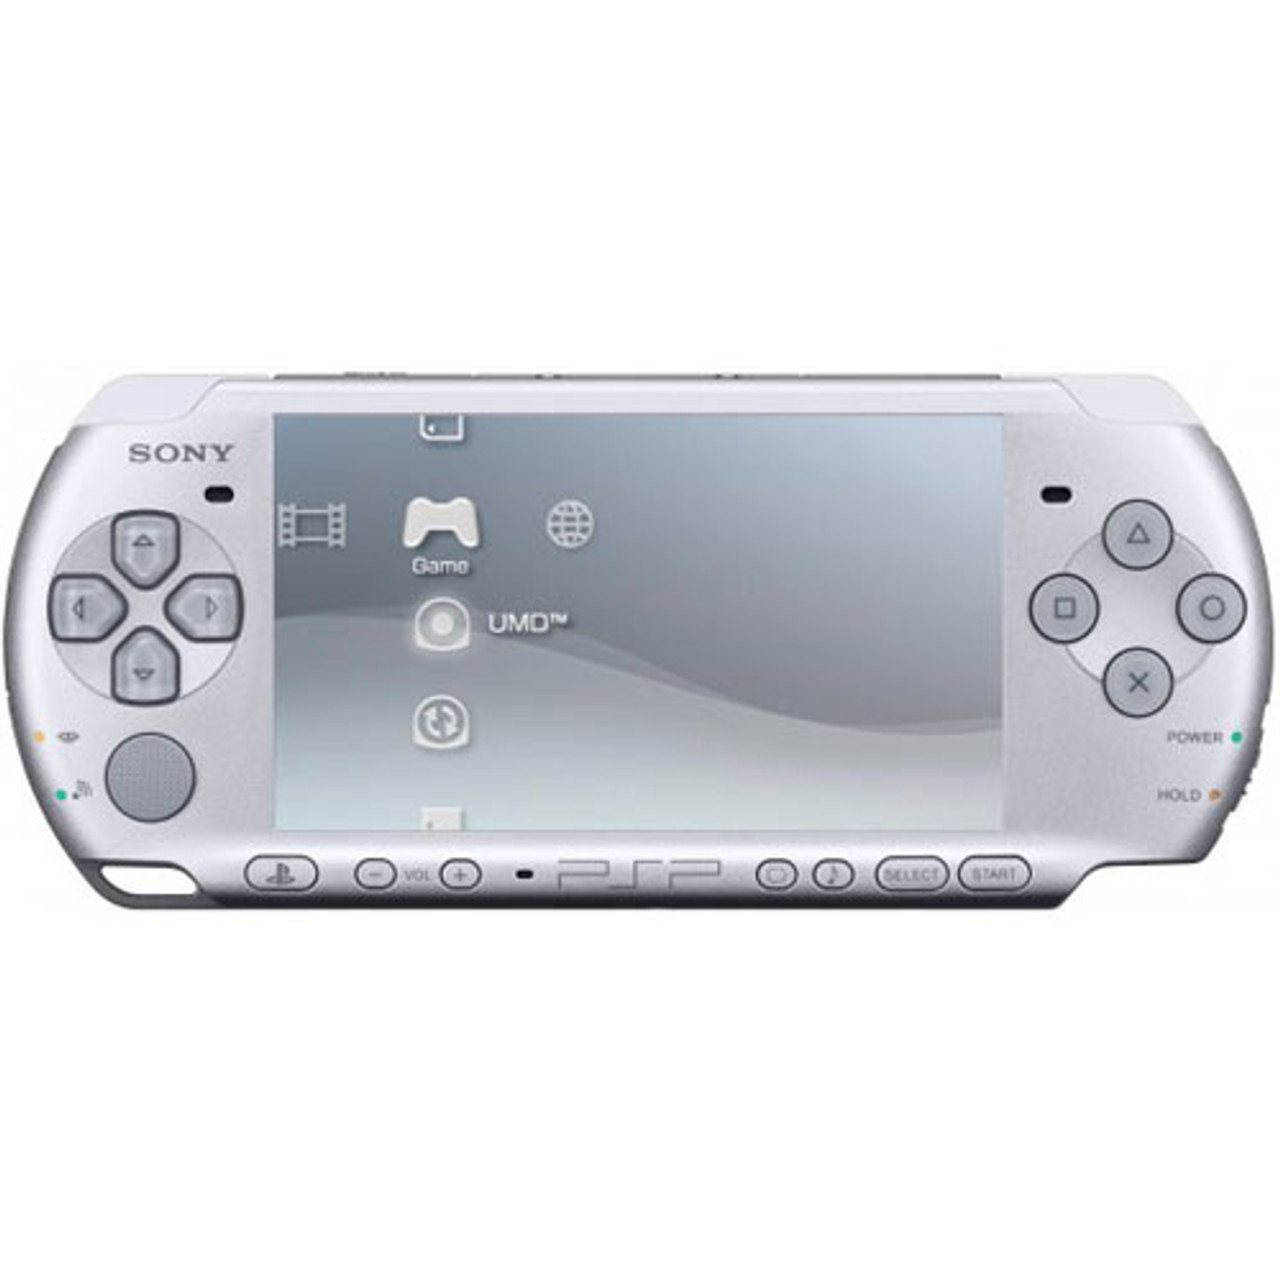 Sony PSP 2000 Handheld System Silver With Charger